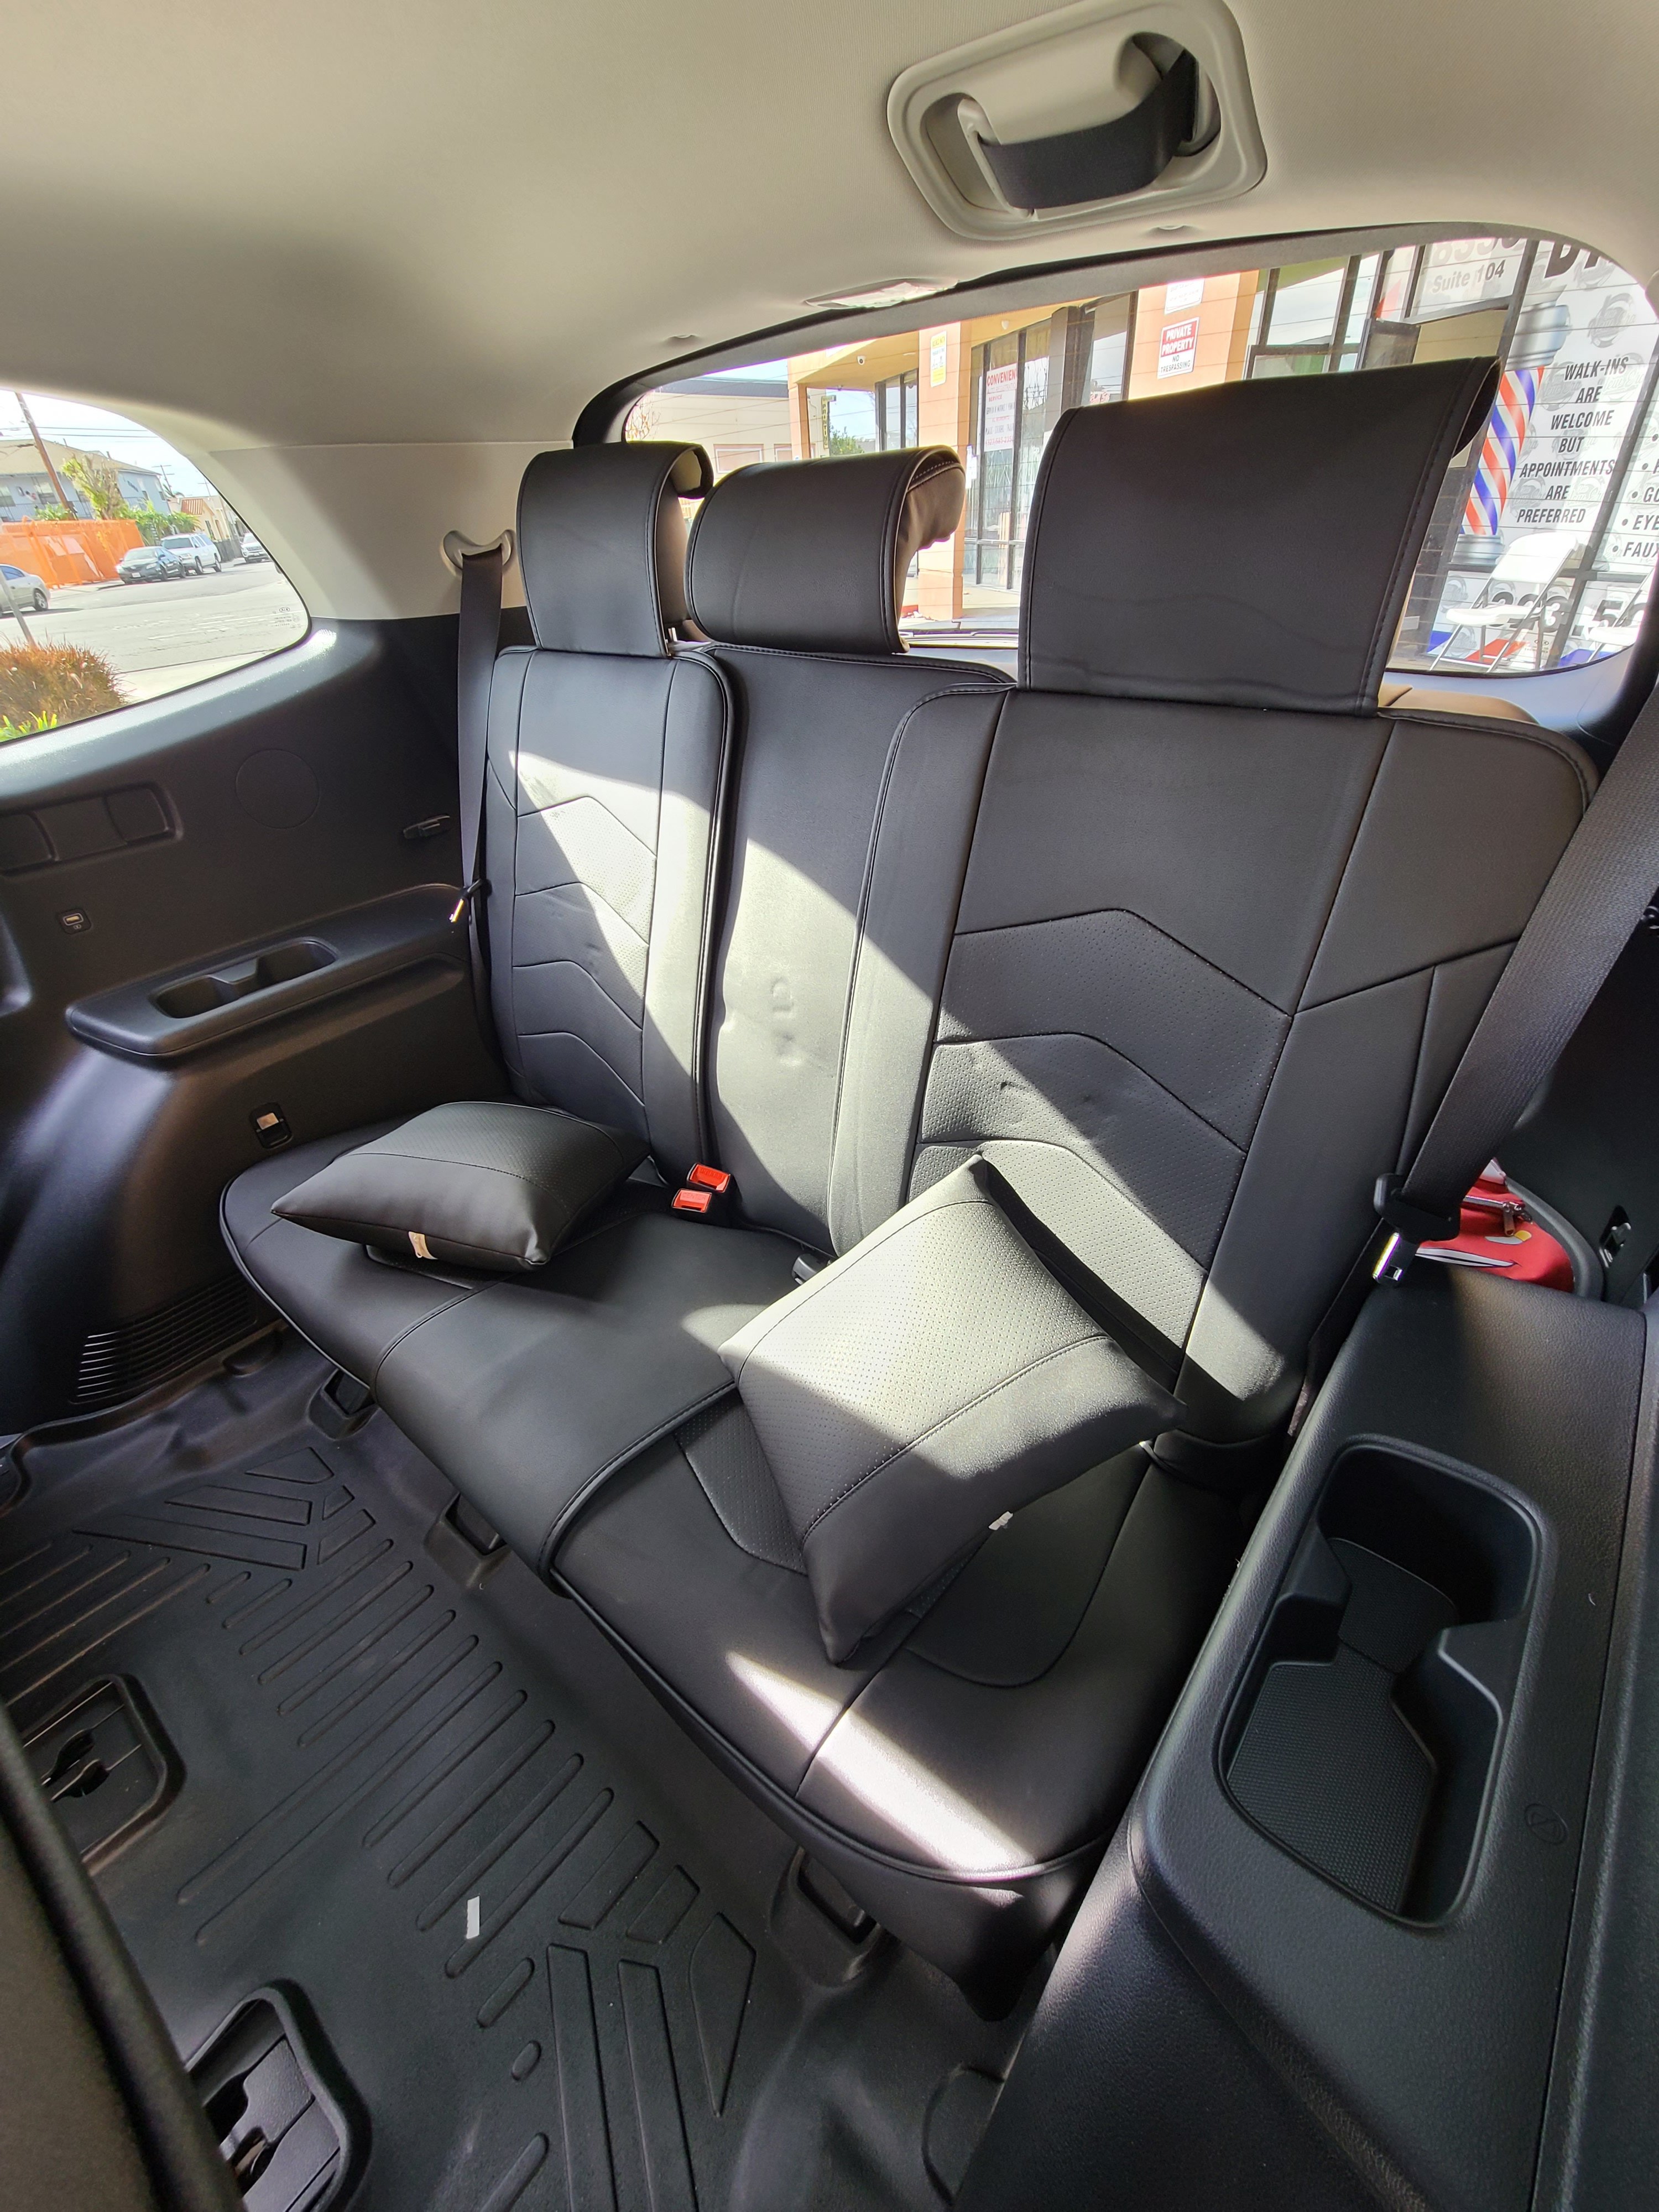 2020 Kia Telluride Seat Cover Installed – Car Seat Cover and Custom Car